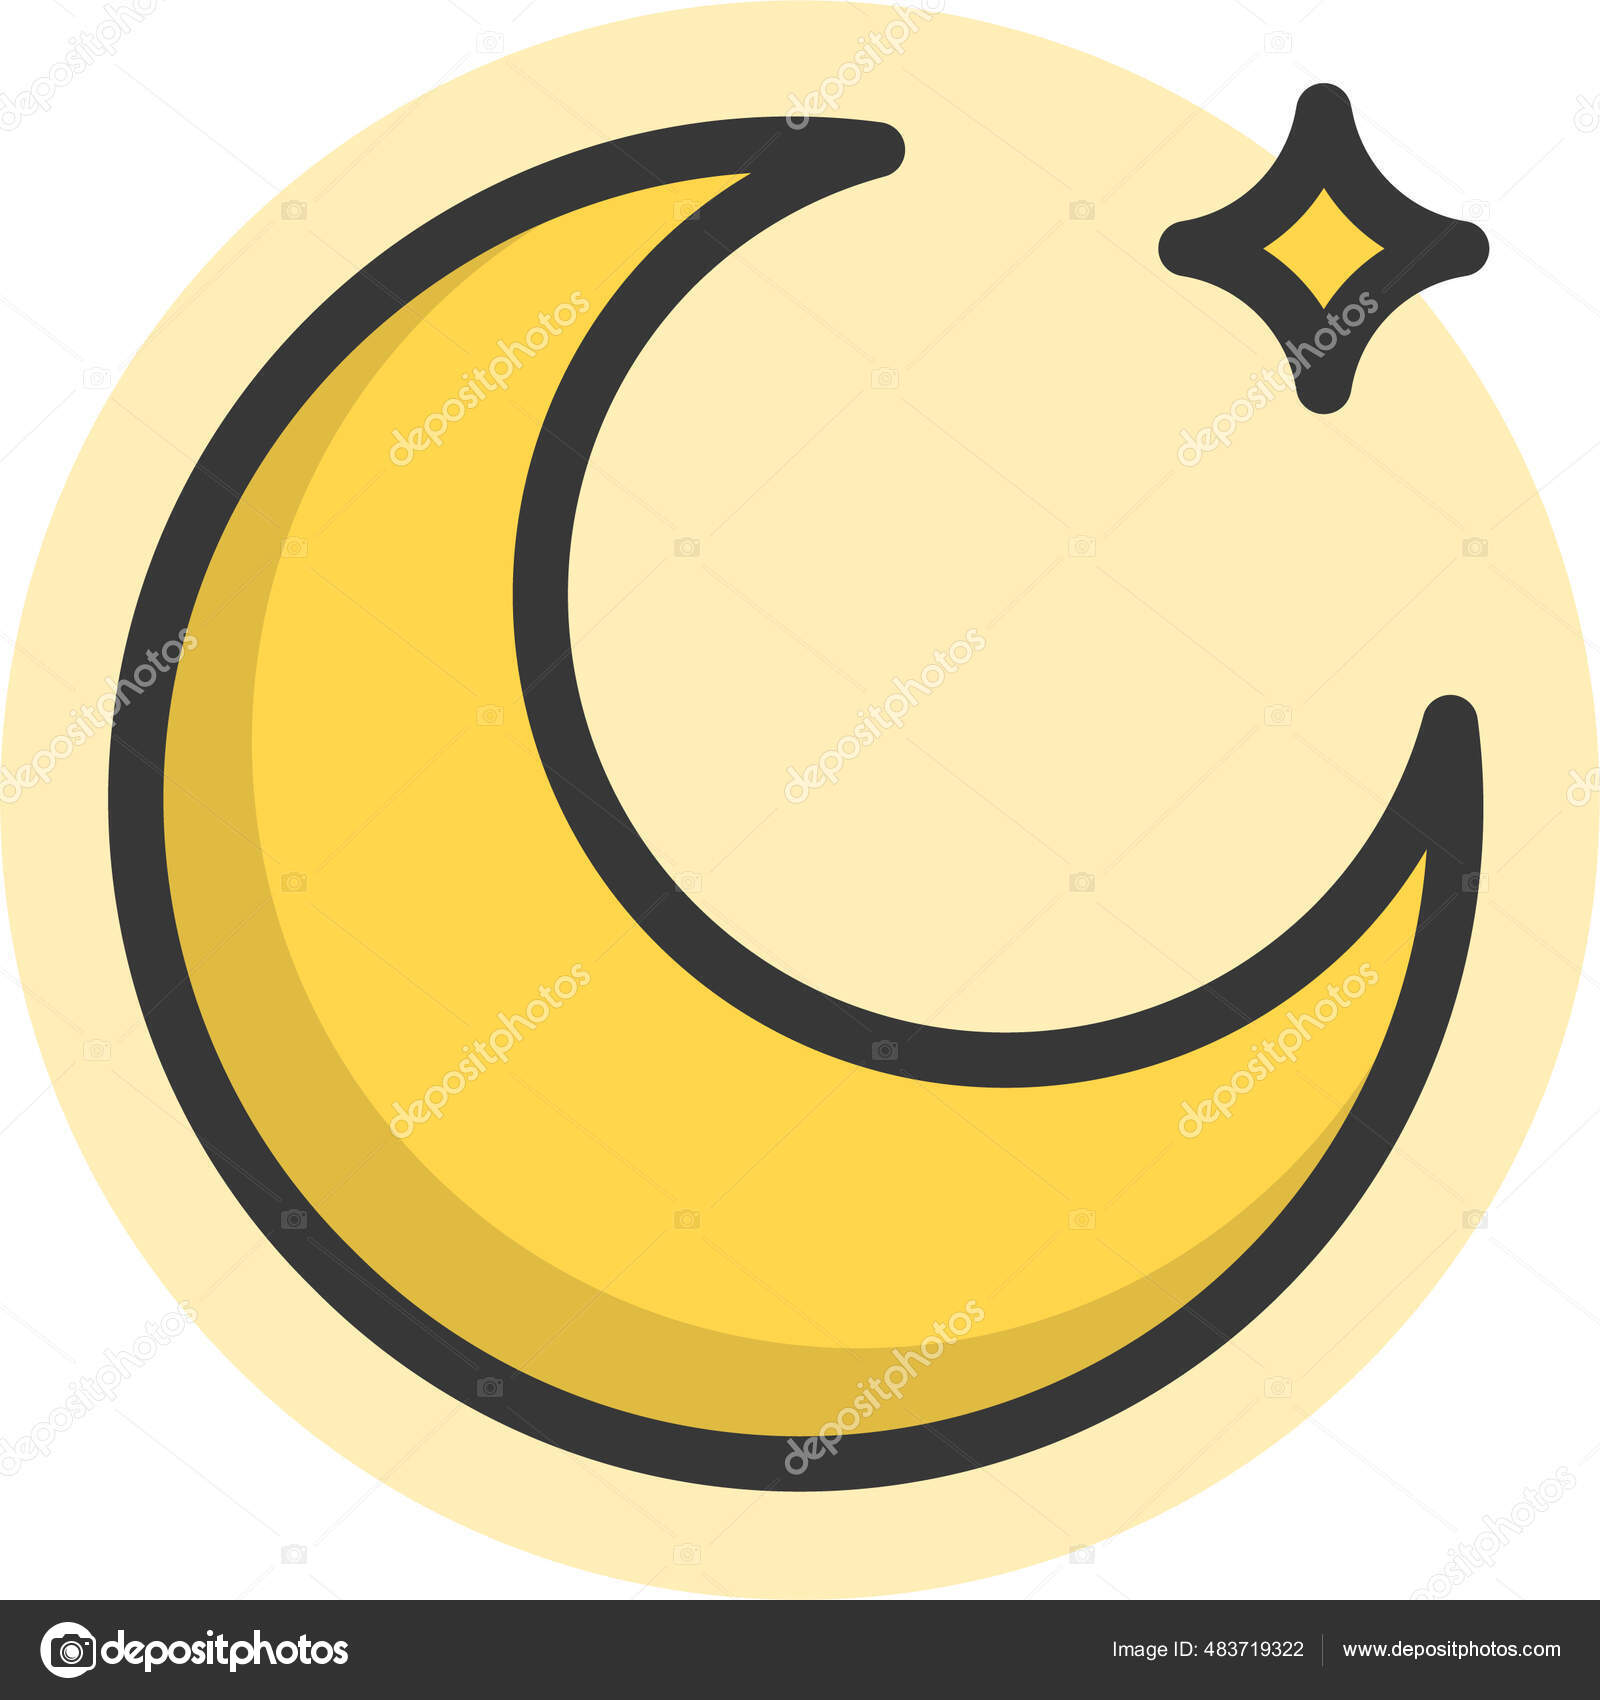 Moon, symbol icon - Free download on Iconfinder